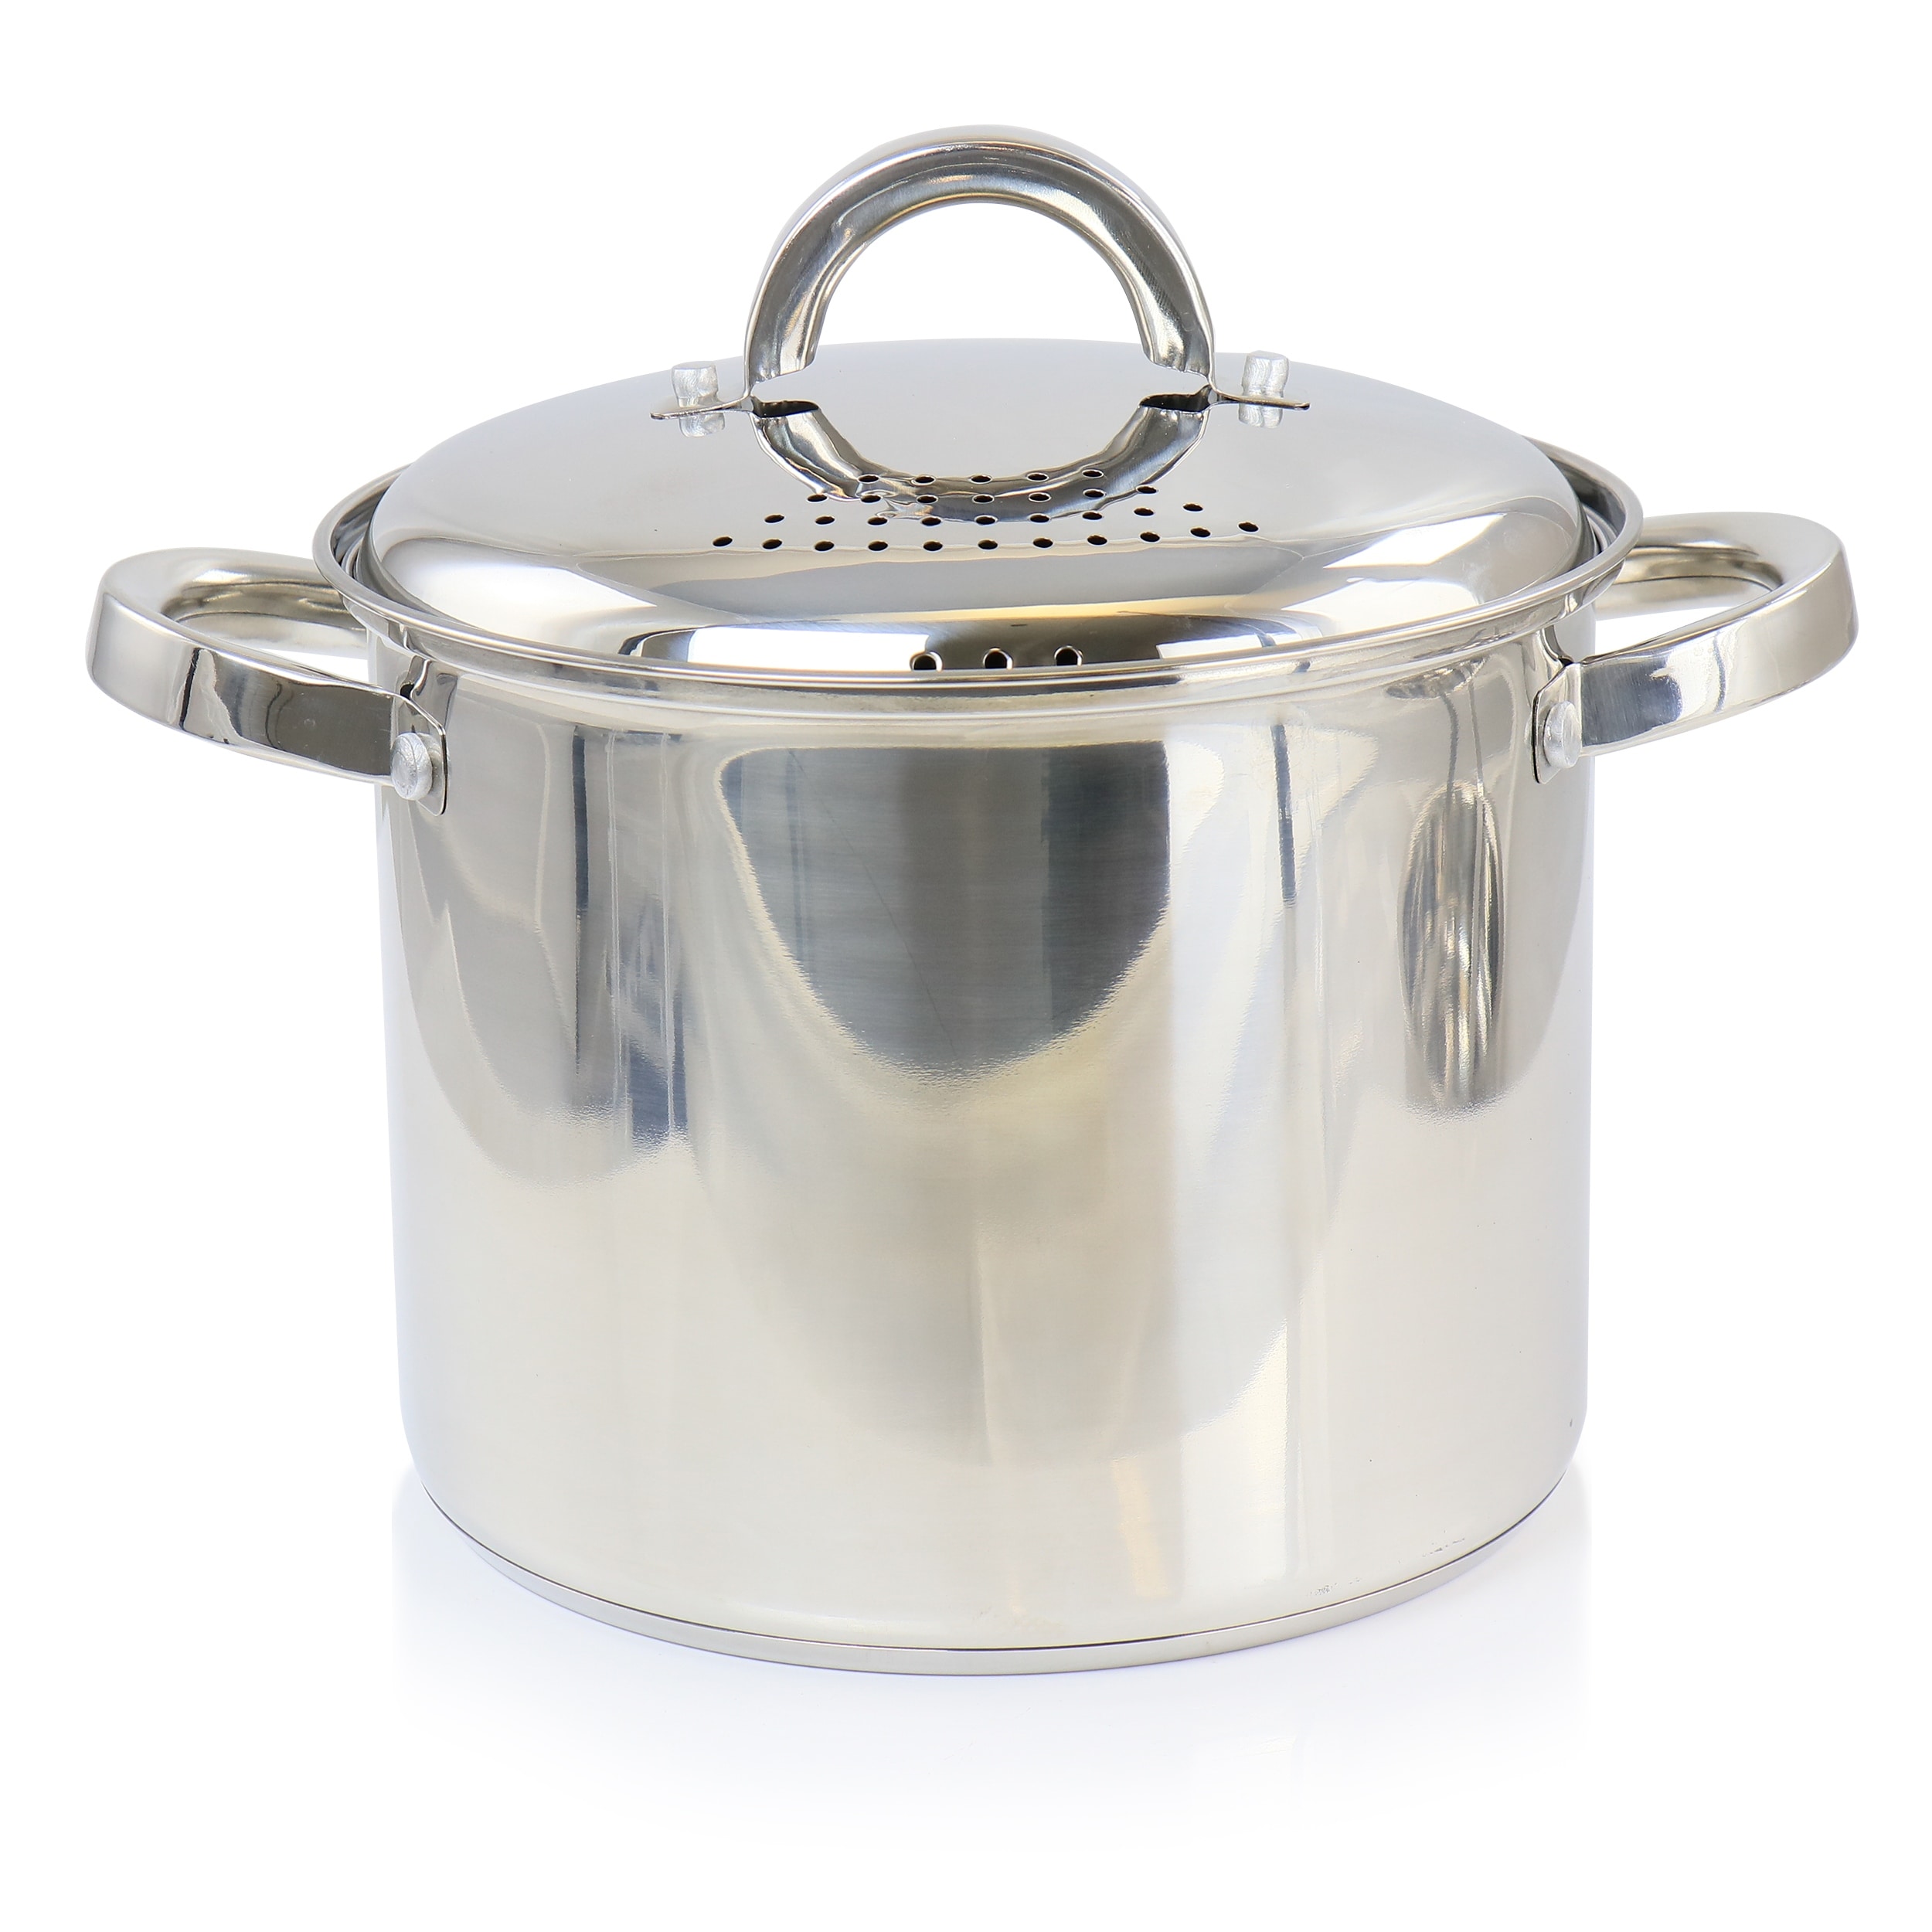 https://ak1.ostkcdn.com/images/products/is/images/direct/d2a5c37e4515de607e9e96495518e48a04086723/Oster-Sangerfield-5Qt-Pasta-Pot-with-Strainer-Lid-and-Steamer.jpg